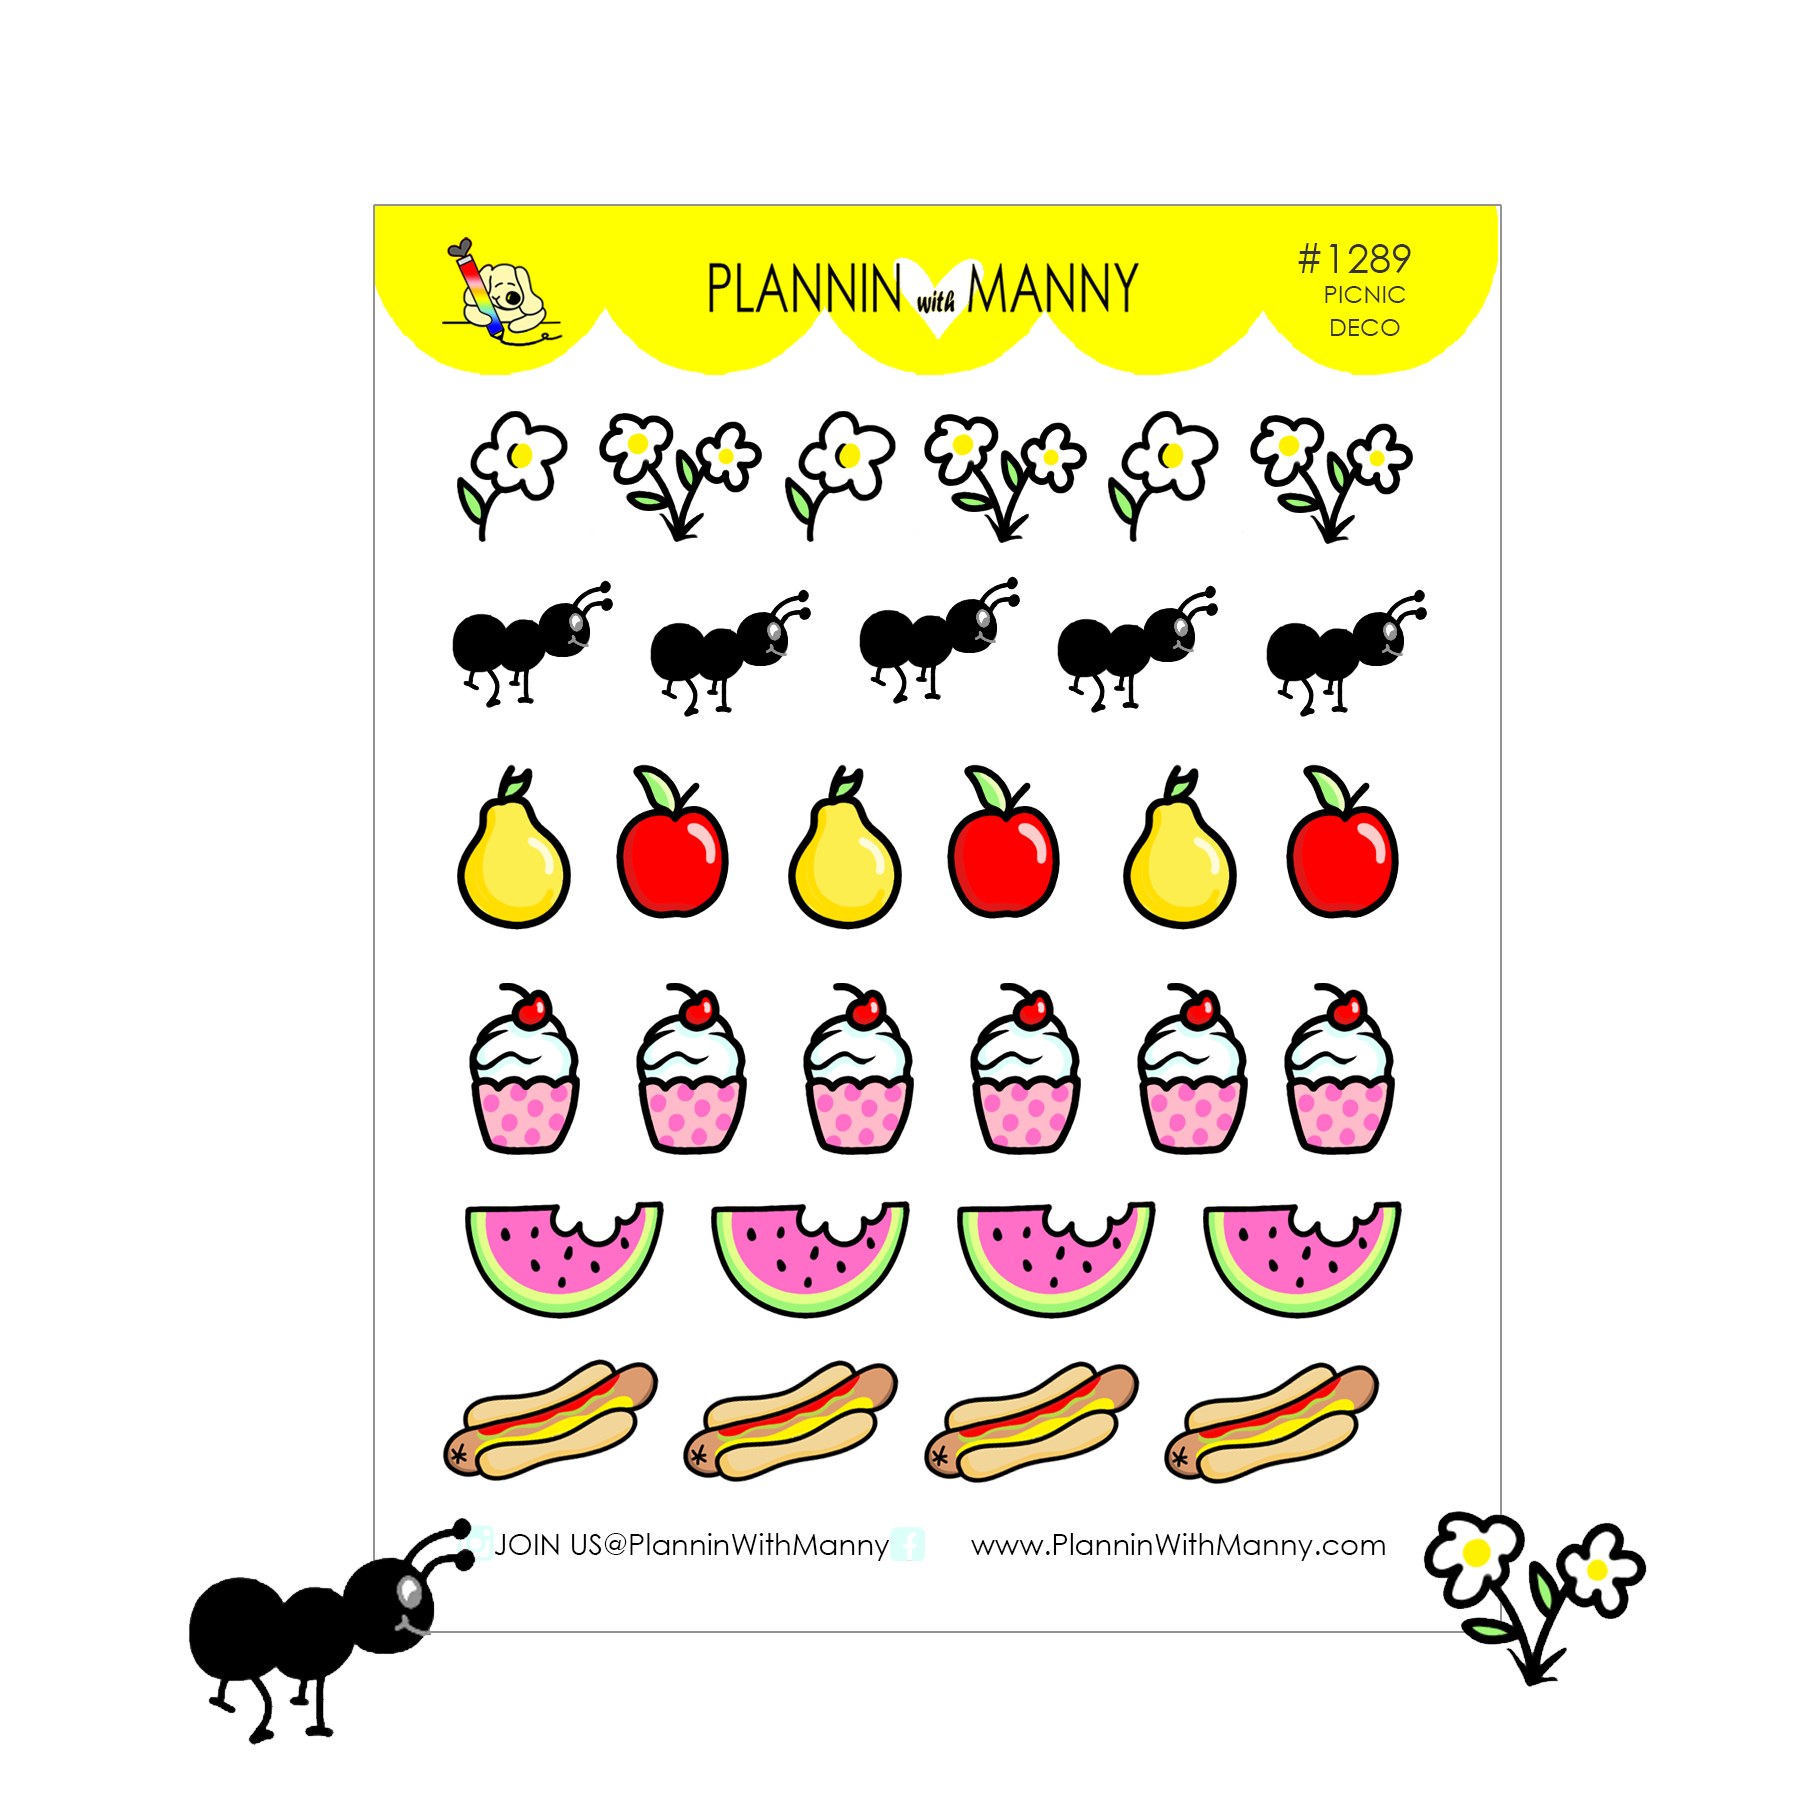 1289 Picnic Goodies and Deco Planner Stickers